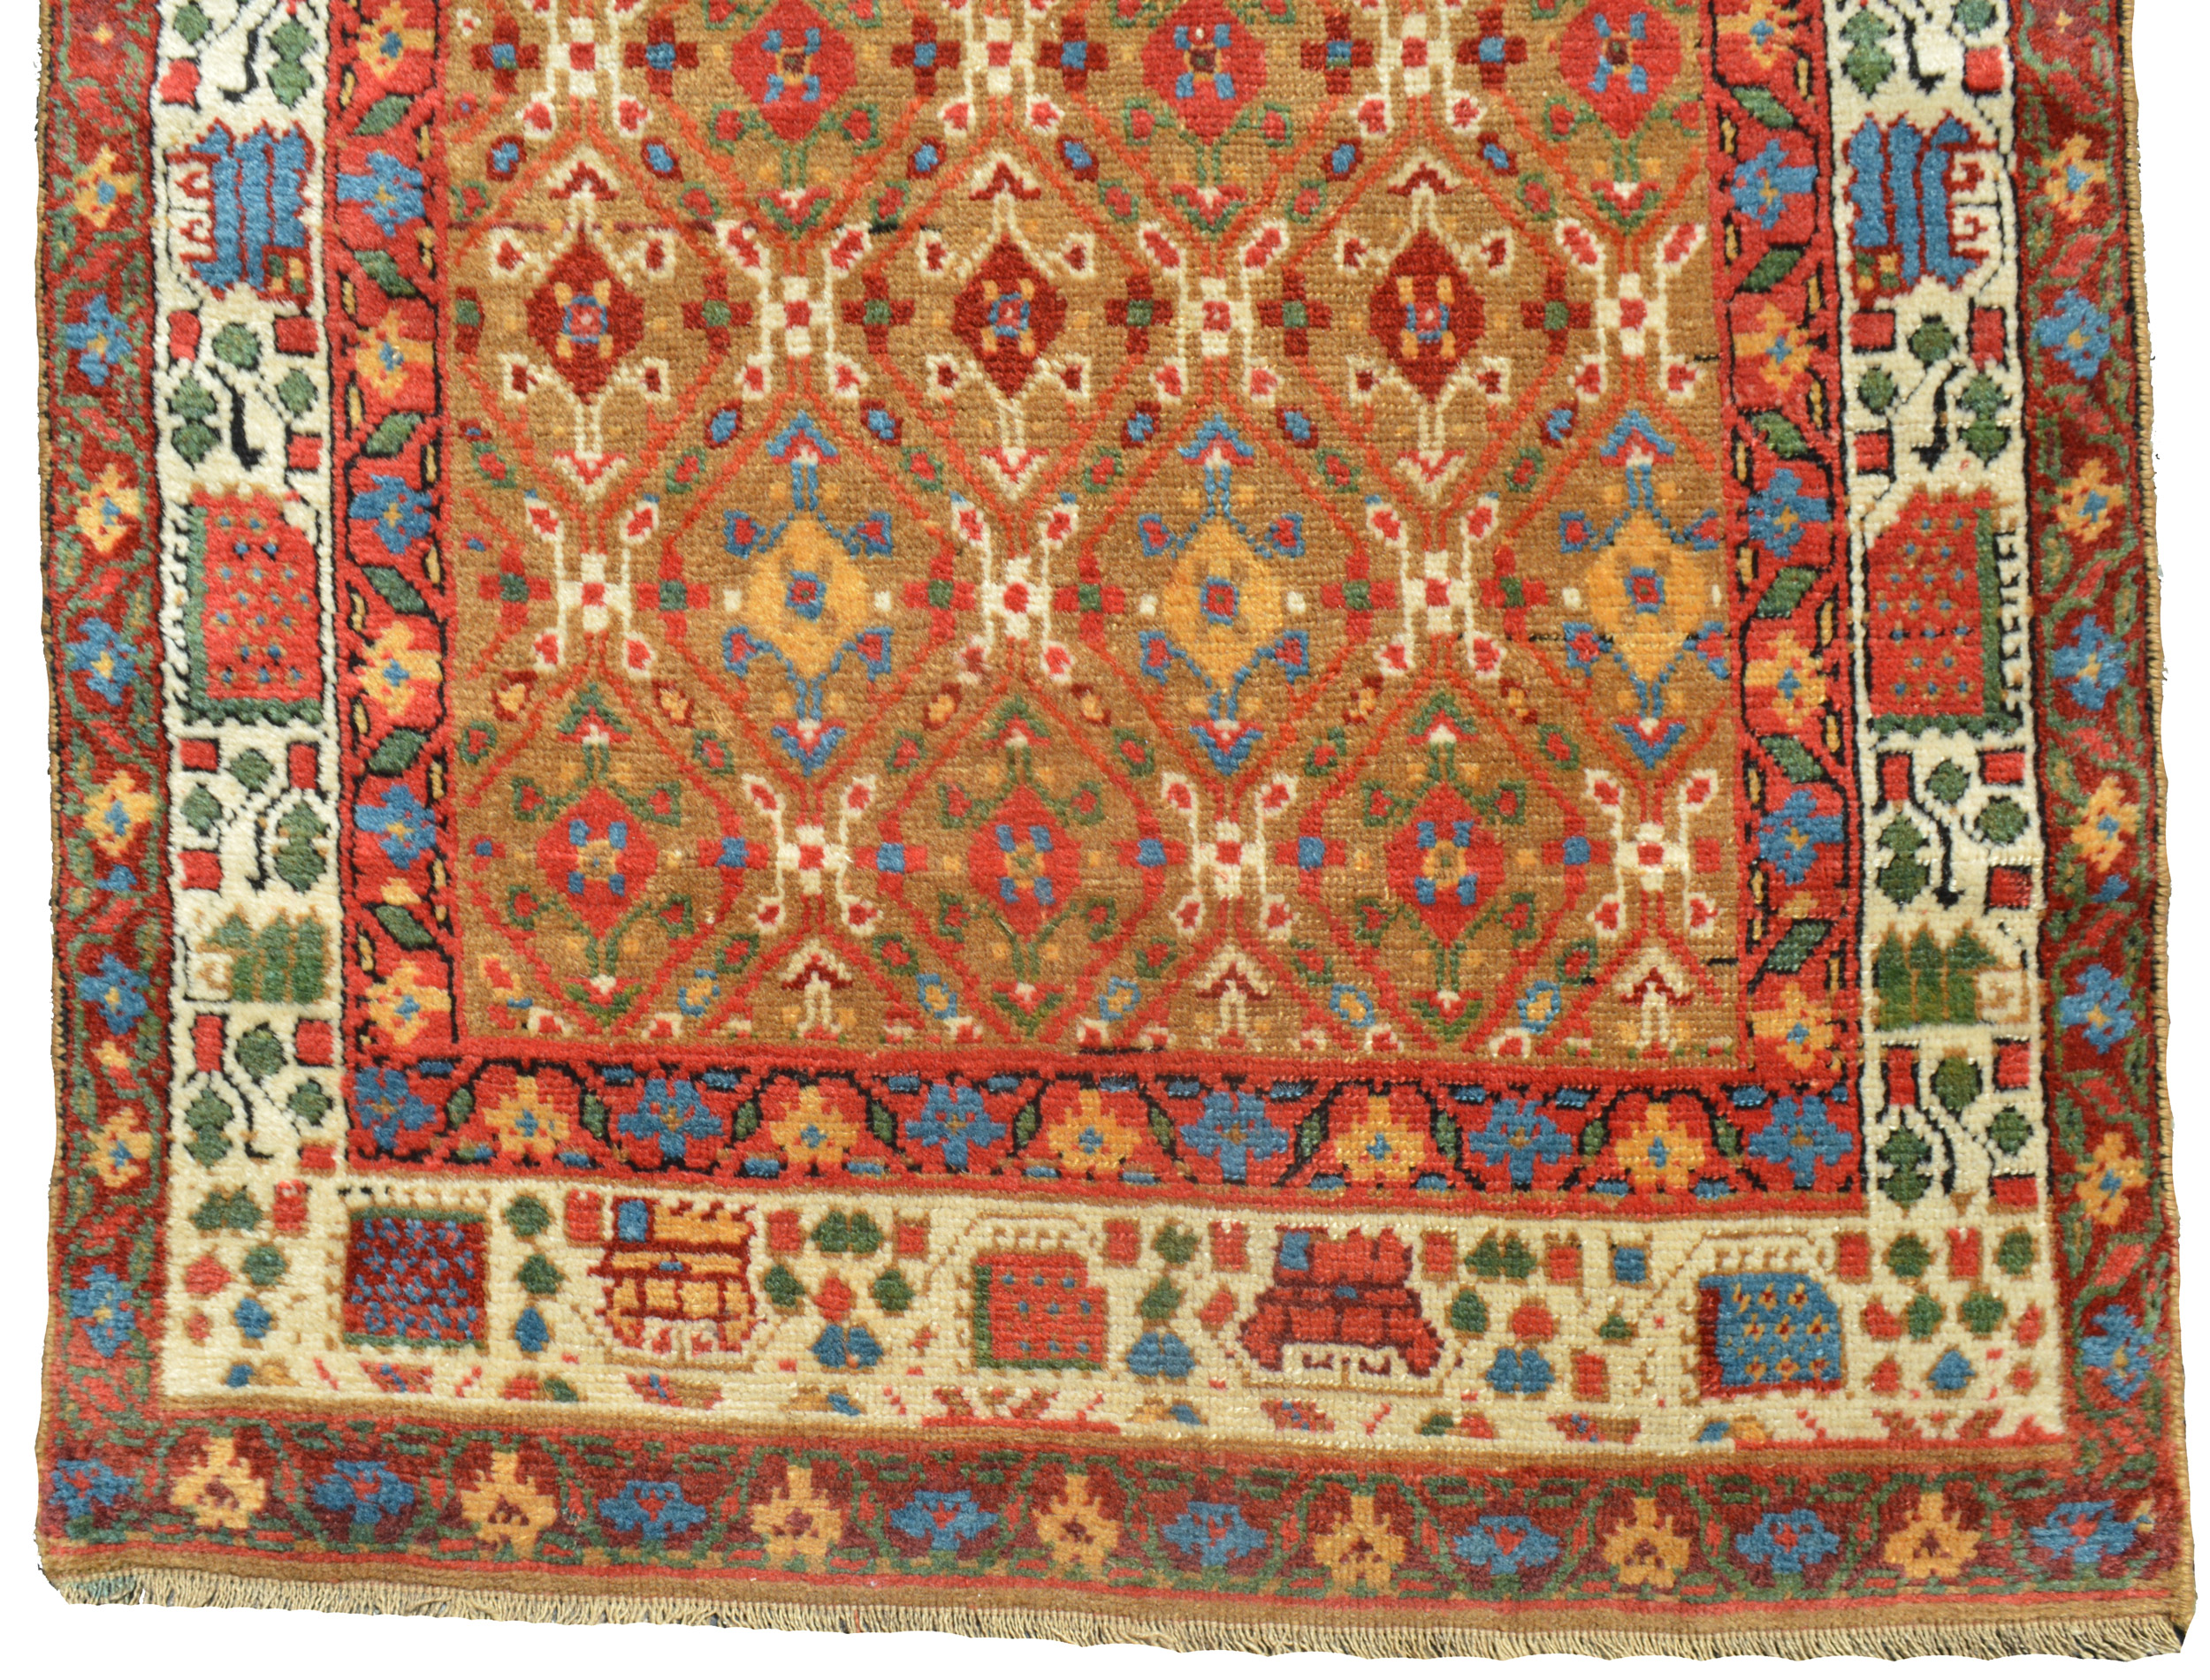 Detail of an antique northwest Persian runner rug with a camel color field decorated with geometric motifs and framed by an ivory border, circa 1875 - Douglas Stock Gallery antique Oriental rugs, Boston,MA area, New England, 19th century Persian rugs